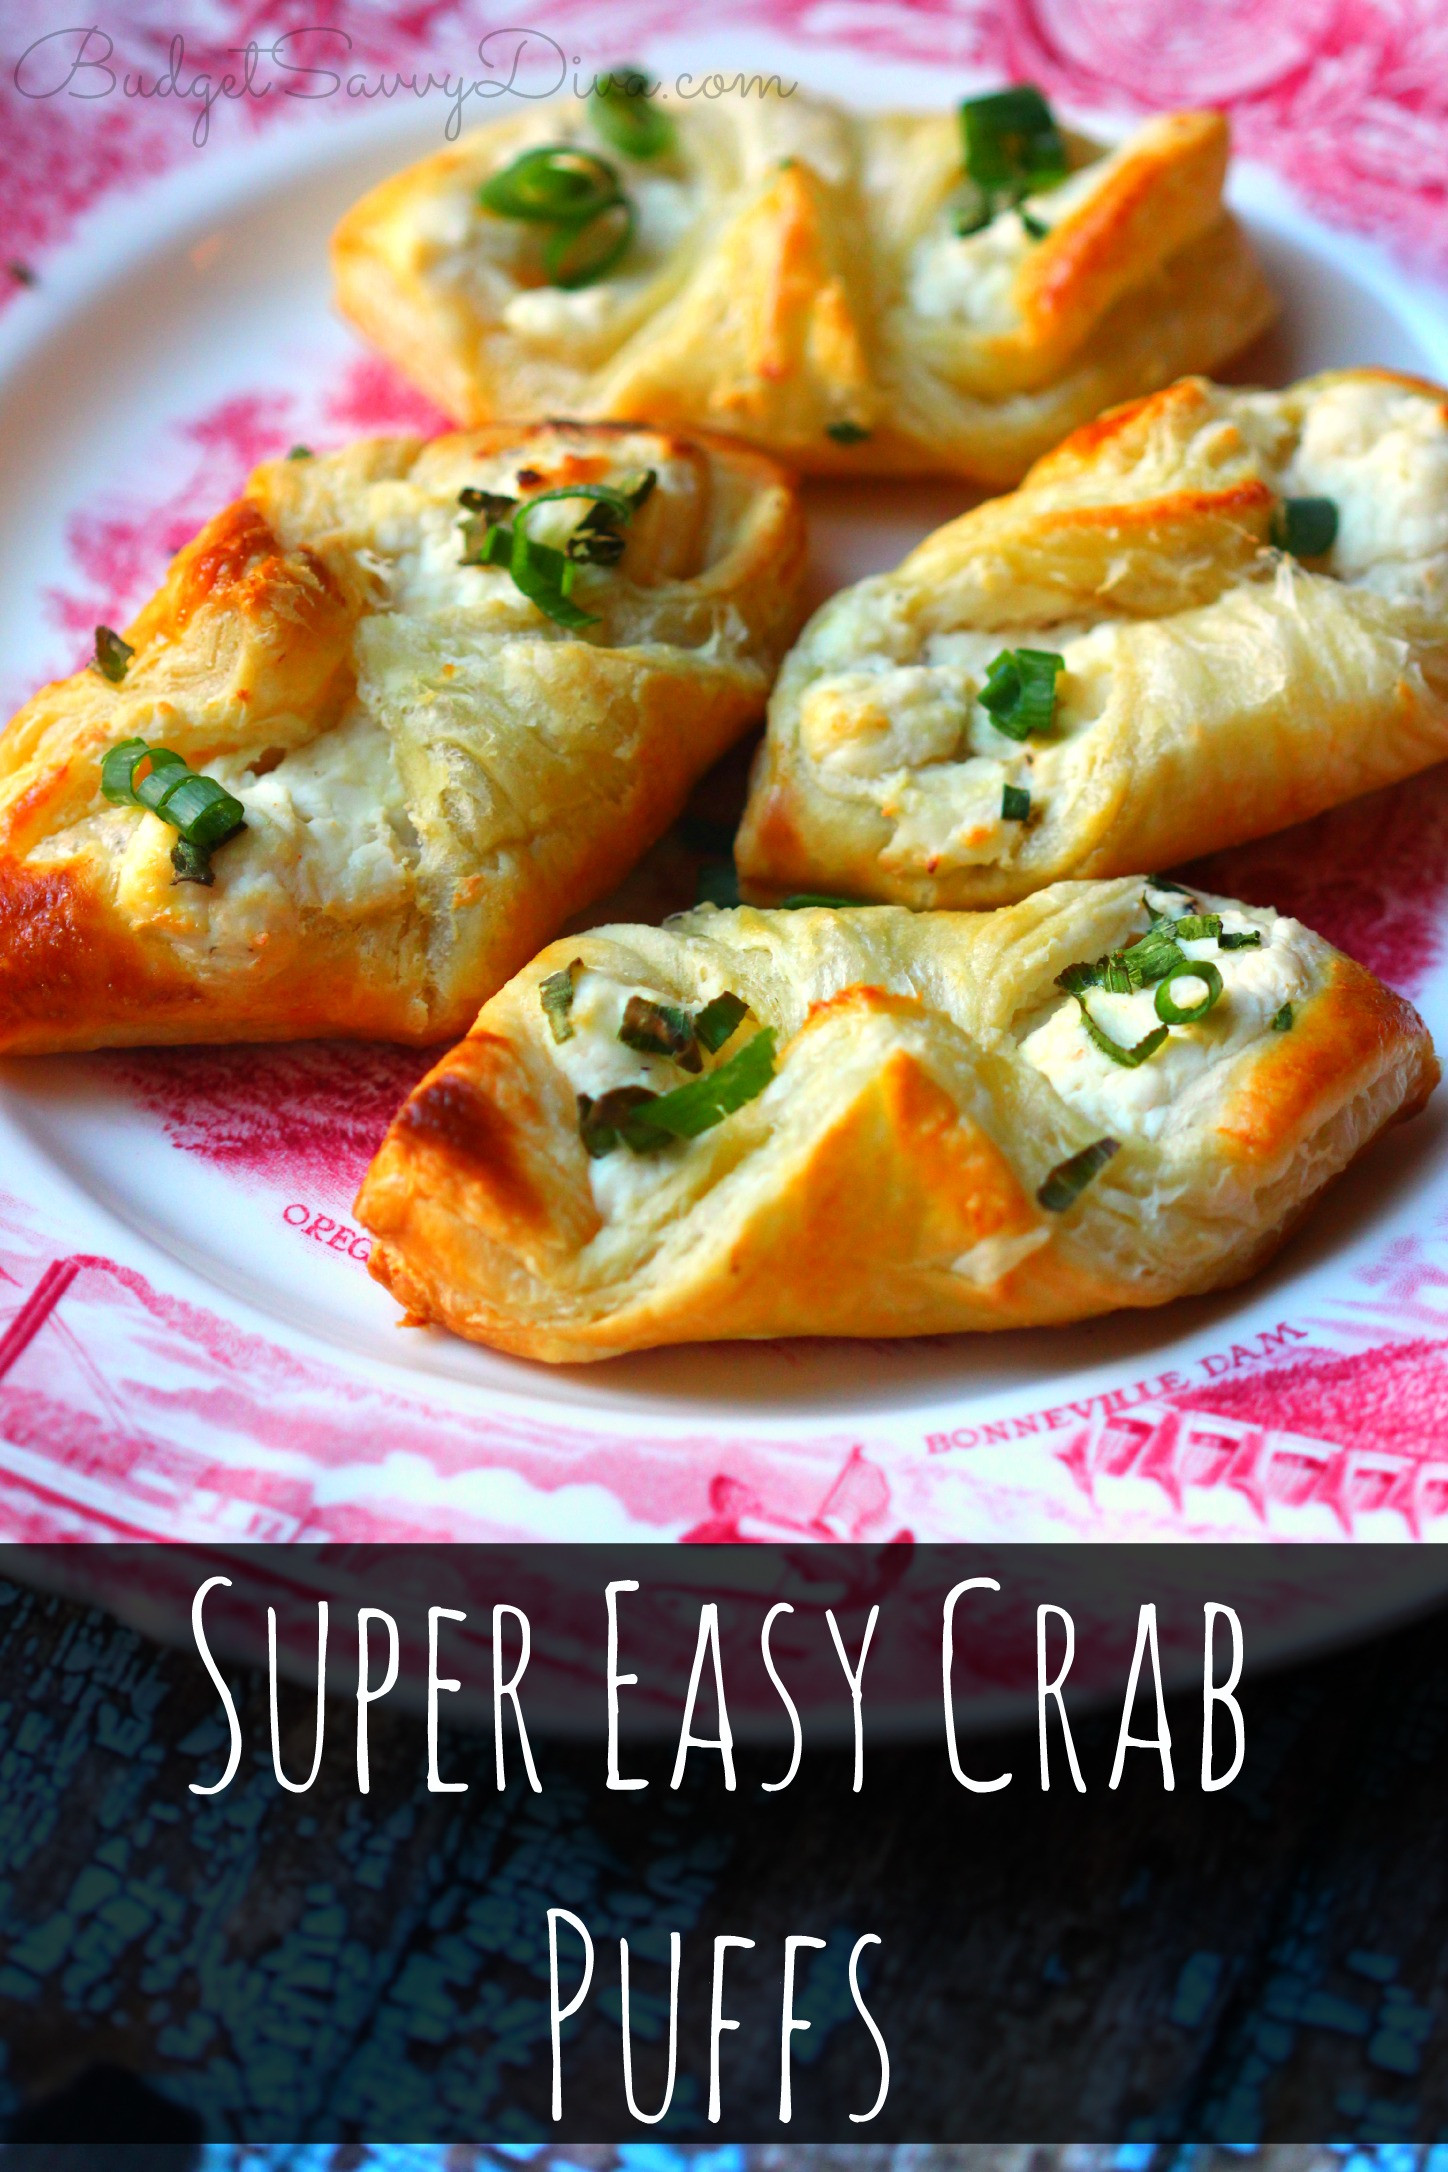 Easy Puff Pastry Appetizers
 Super Easy Crab Puffs Recipe Bud Savvy Diva